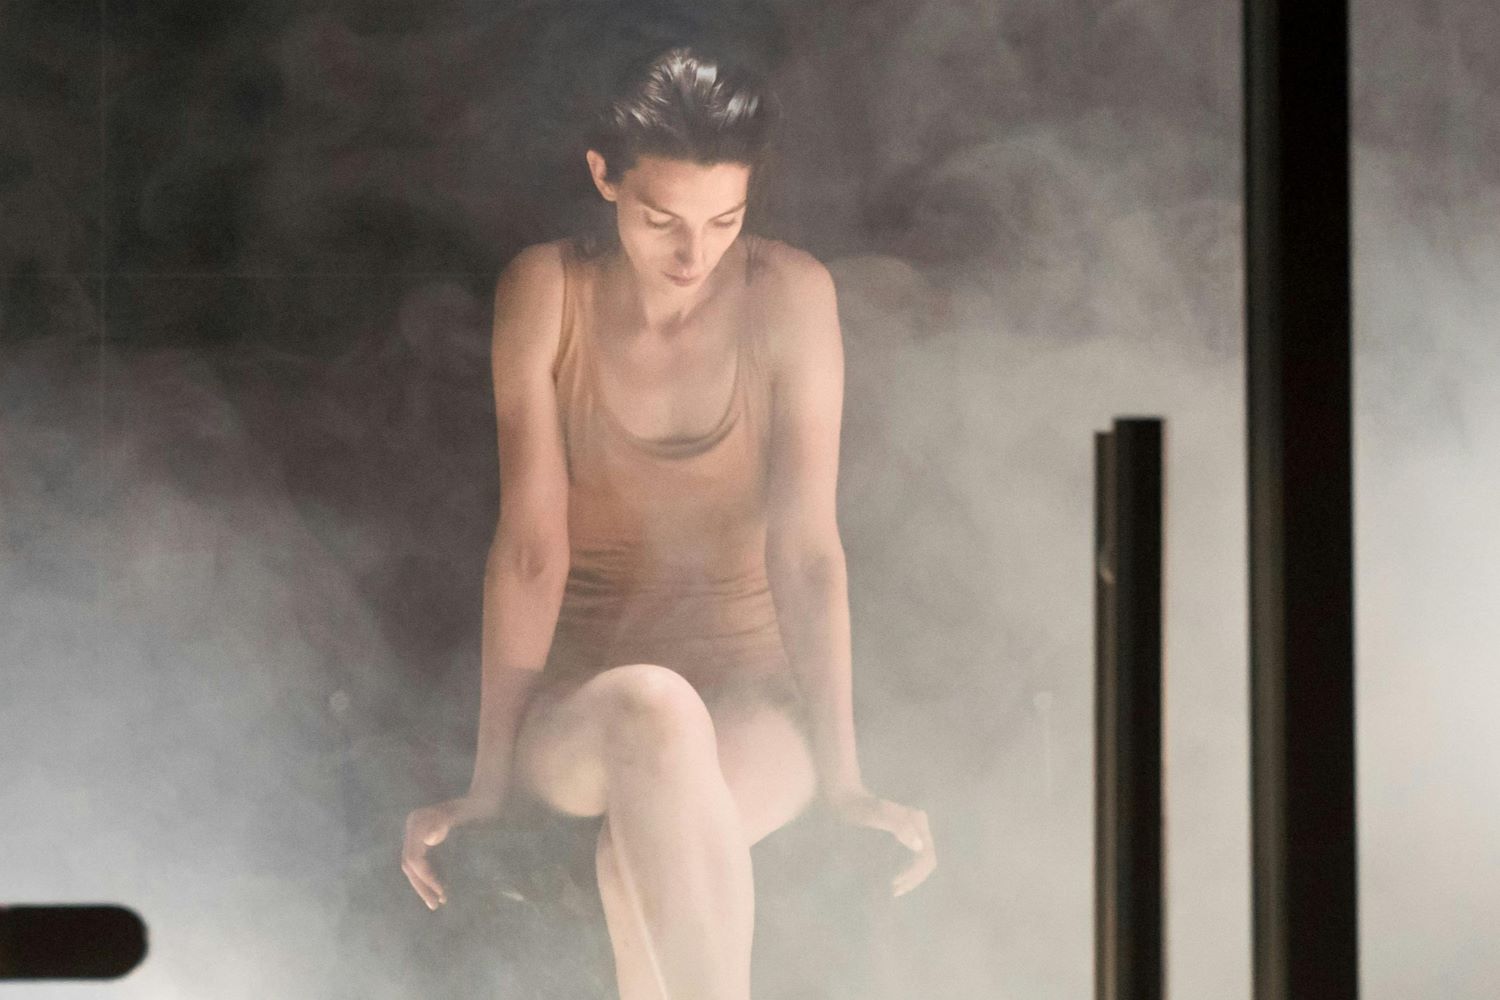 Woman in a Steam Room